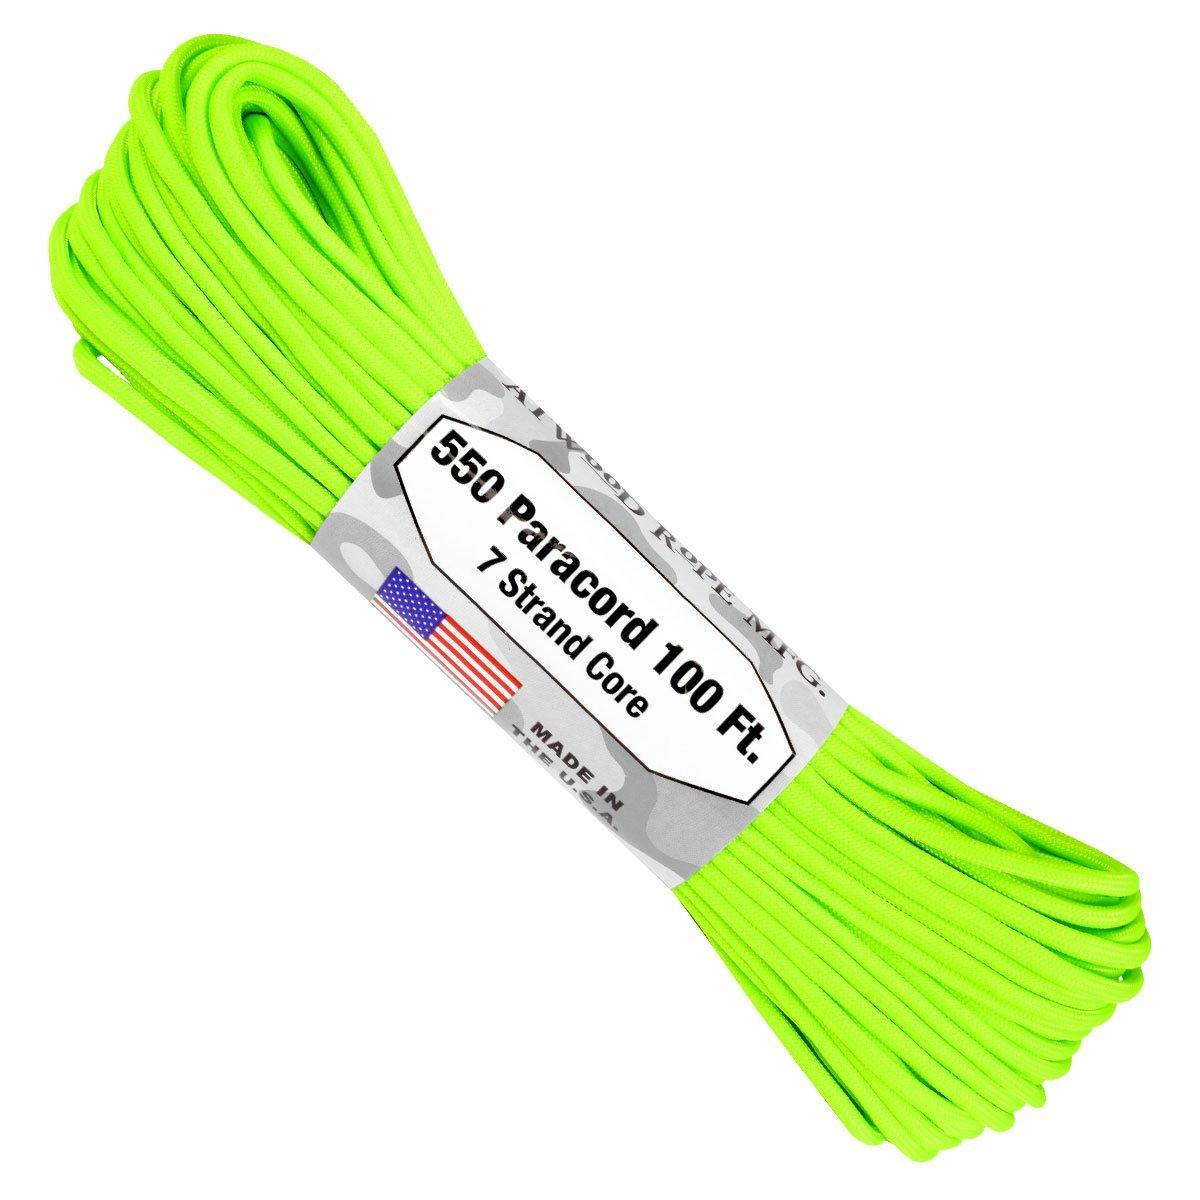 Atwood Paracord - Neon Green - Cams Cords